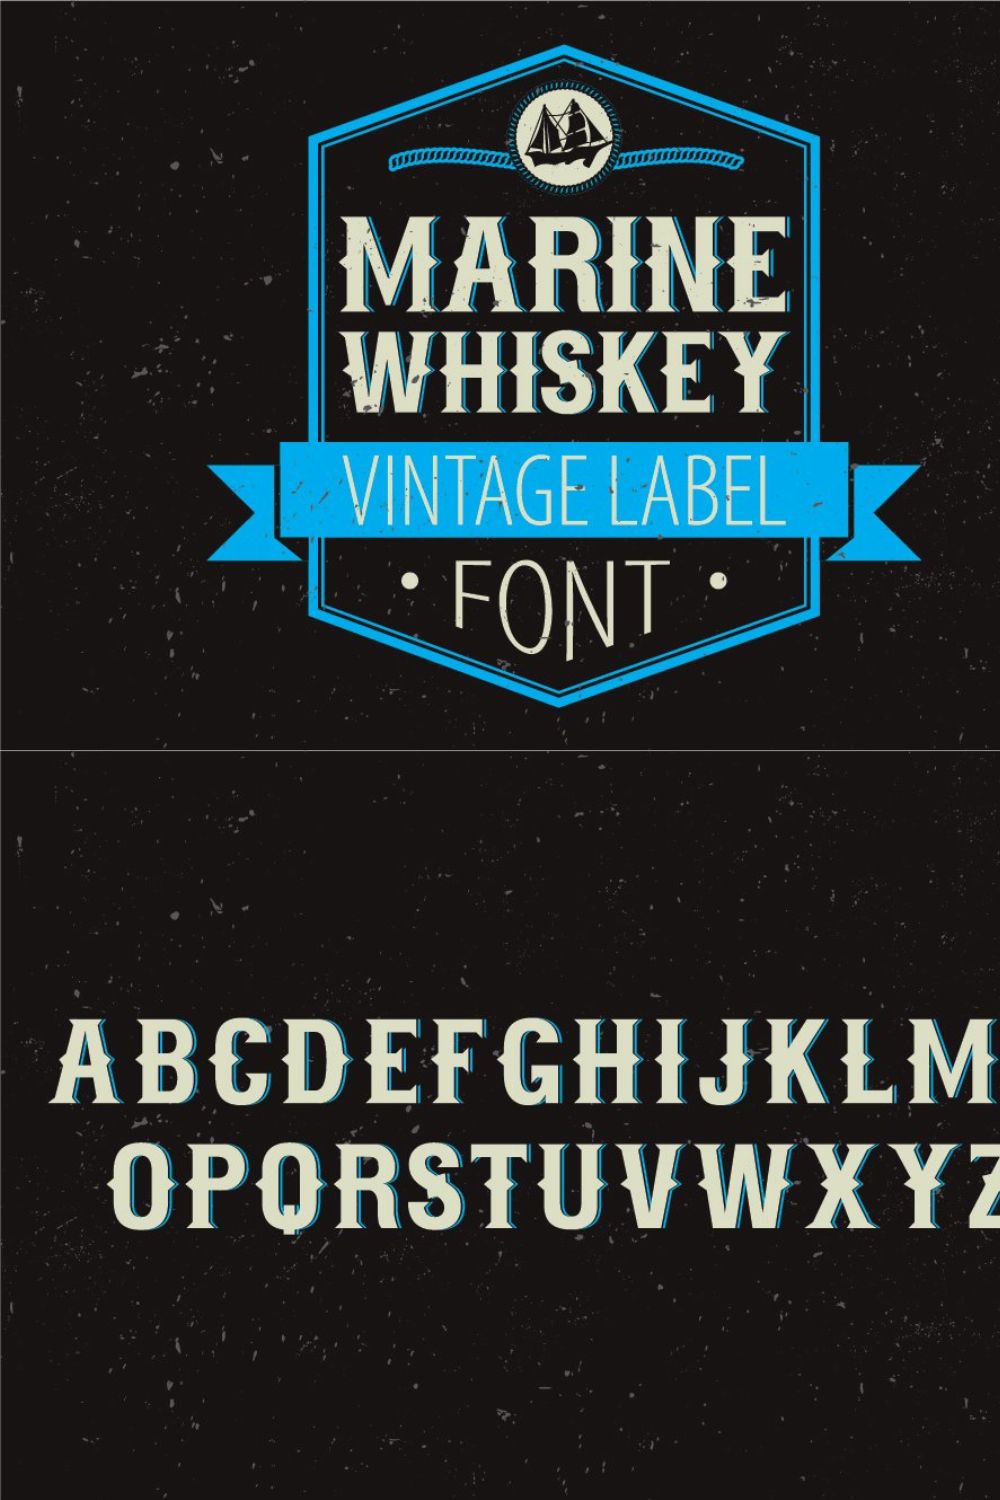 Marine Whiskey label font pinterest preview image.